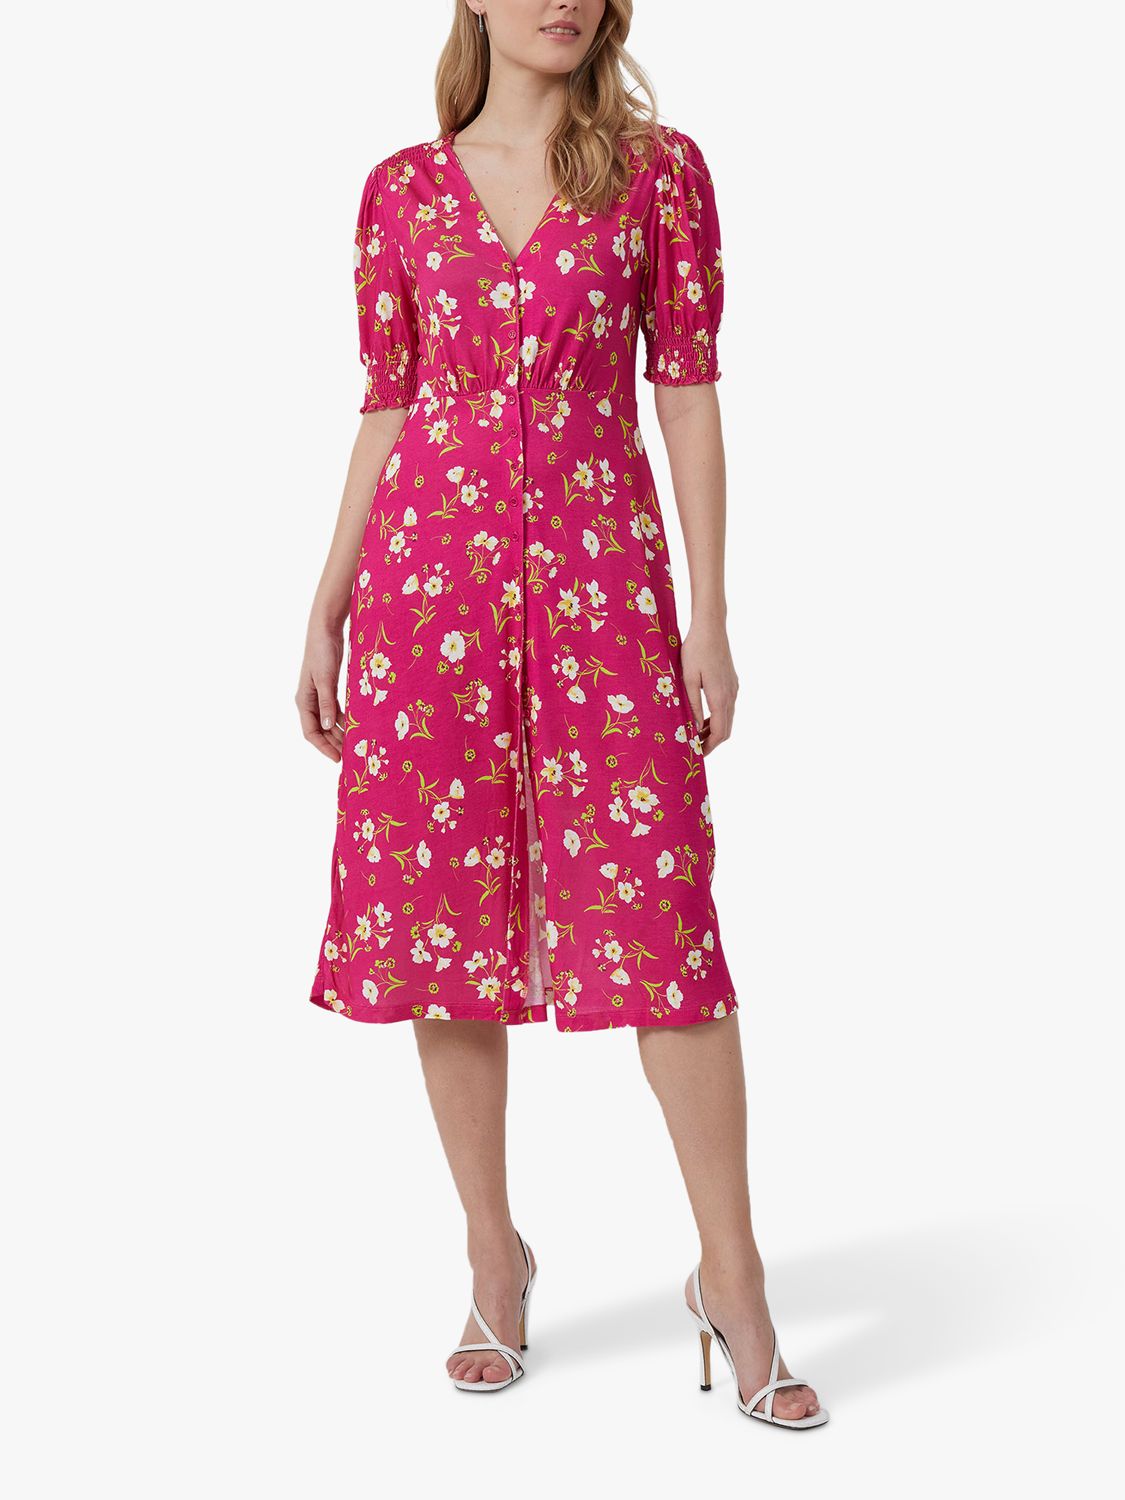 French Connection Shanti Meadow Print Dress, Very Berry